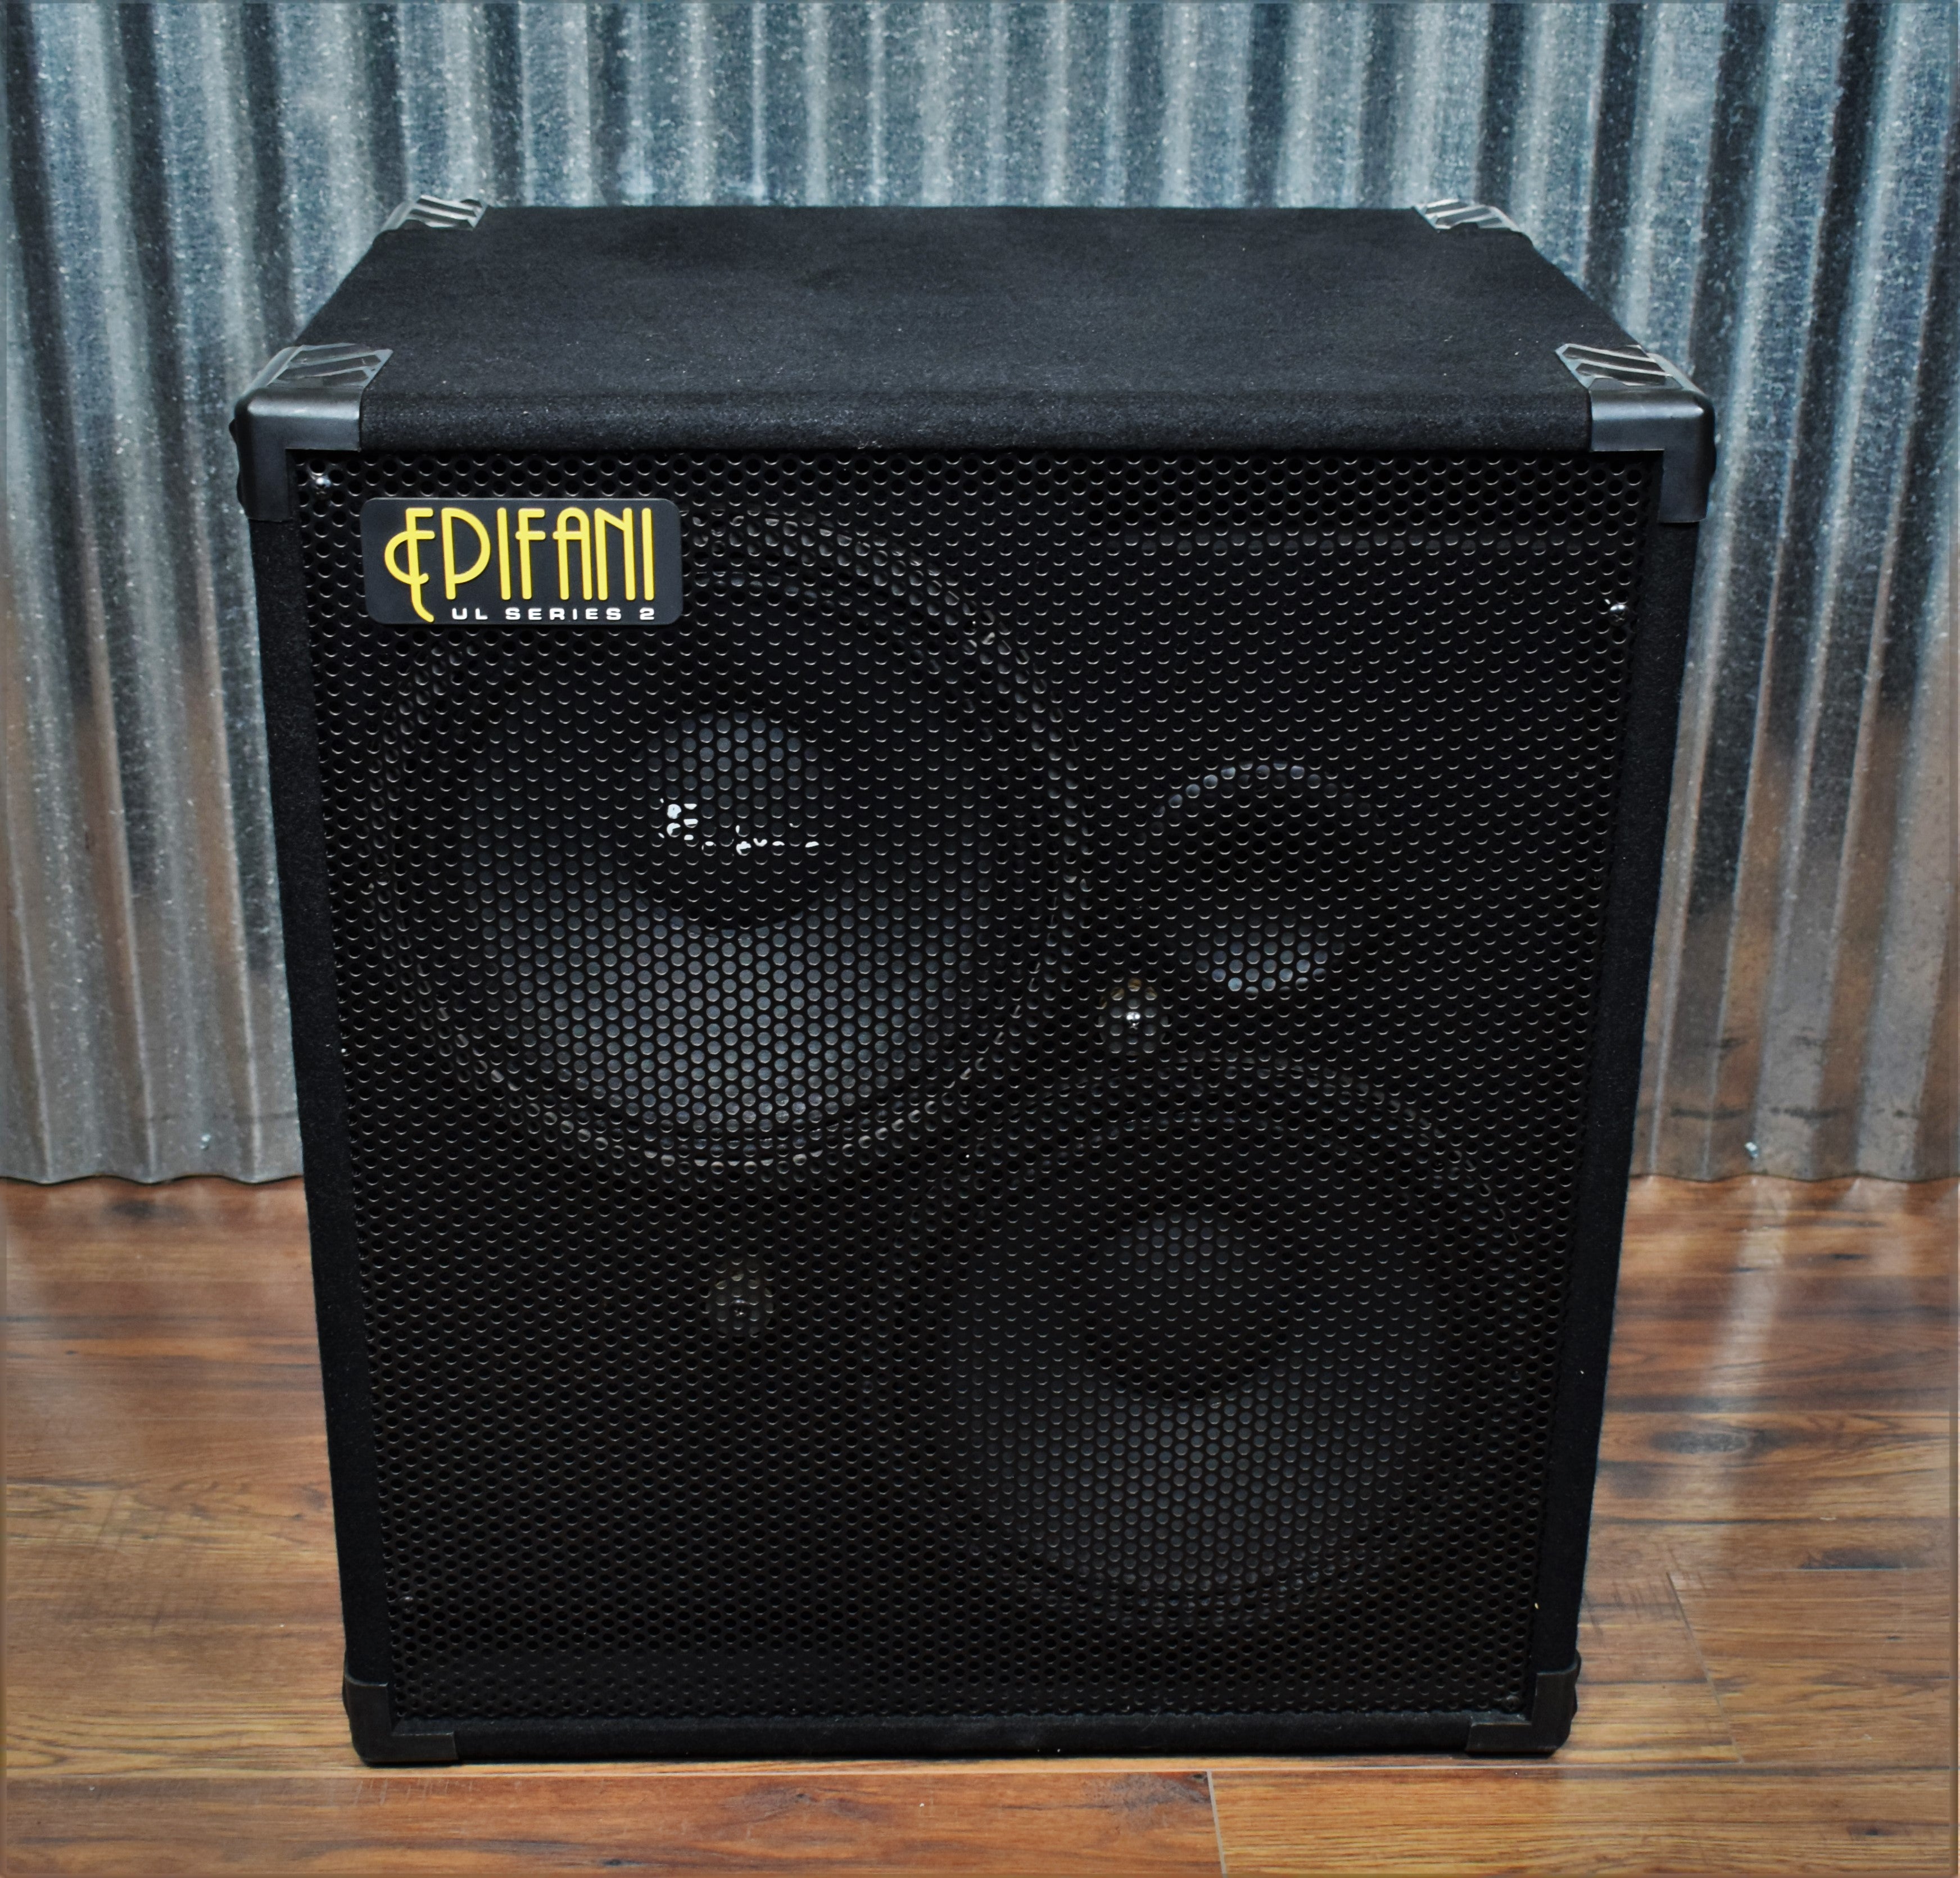 Epifani UL-212 Ultralight 2x12 Bass Speaker Cabinet with Cover Used